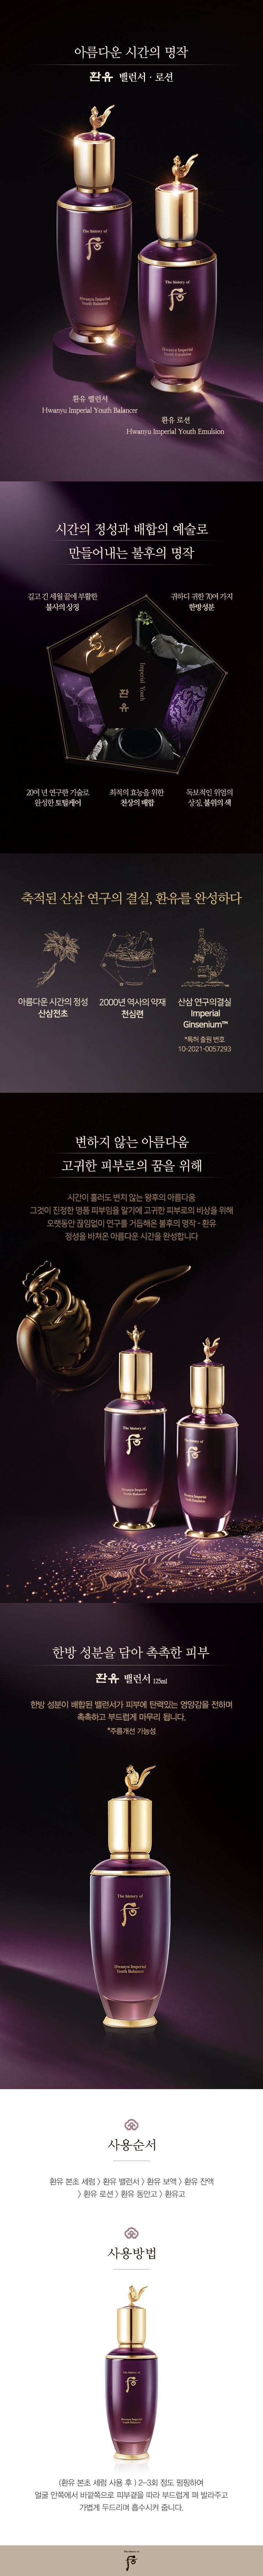 The History Of Whoo_Hwanyu Imperial Youth Balancer 125ml_1